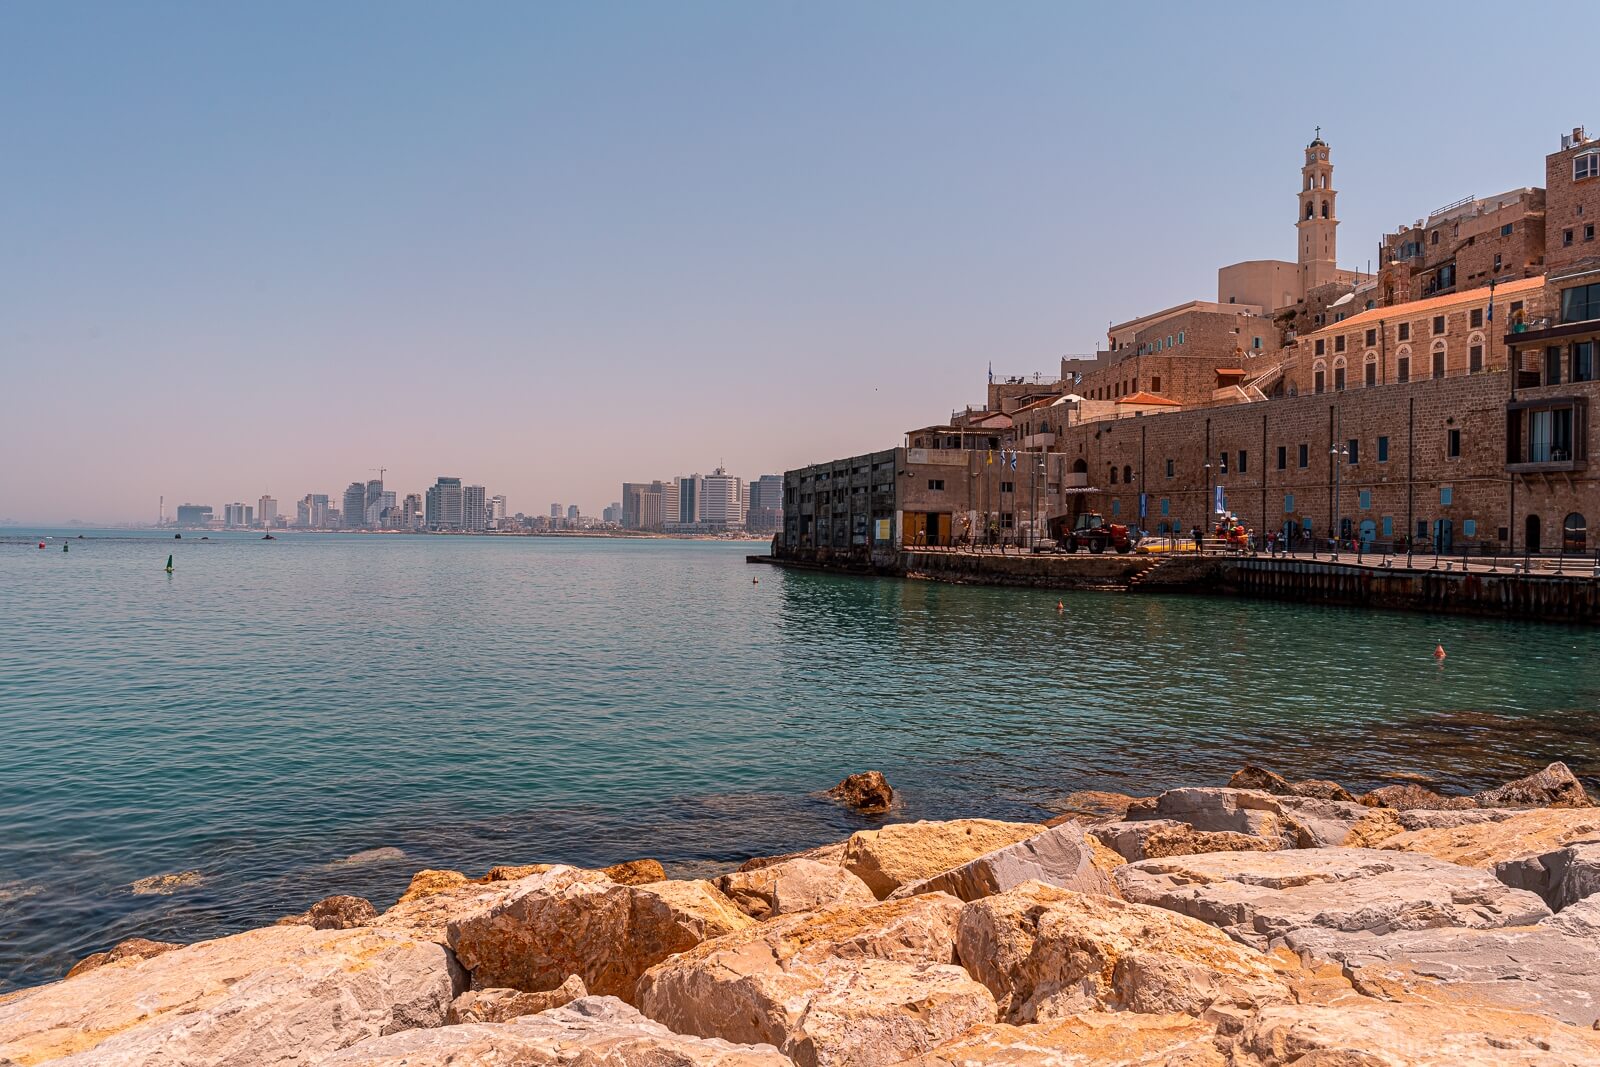 Image of Old Jaffa - waterfront by James Billings.